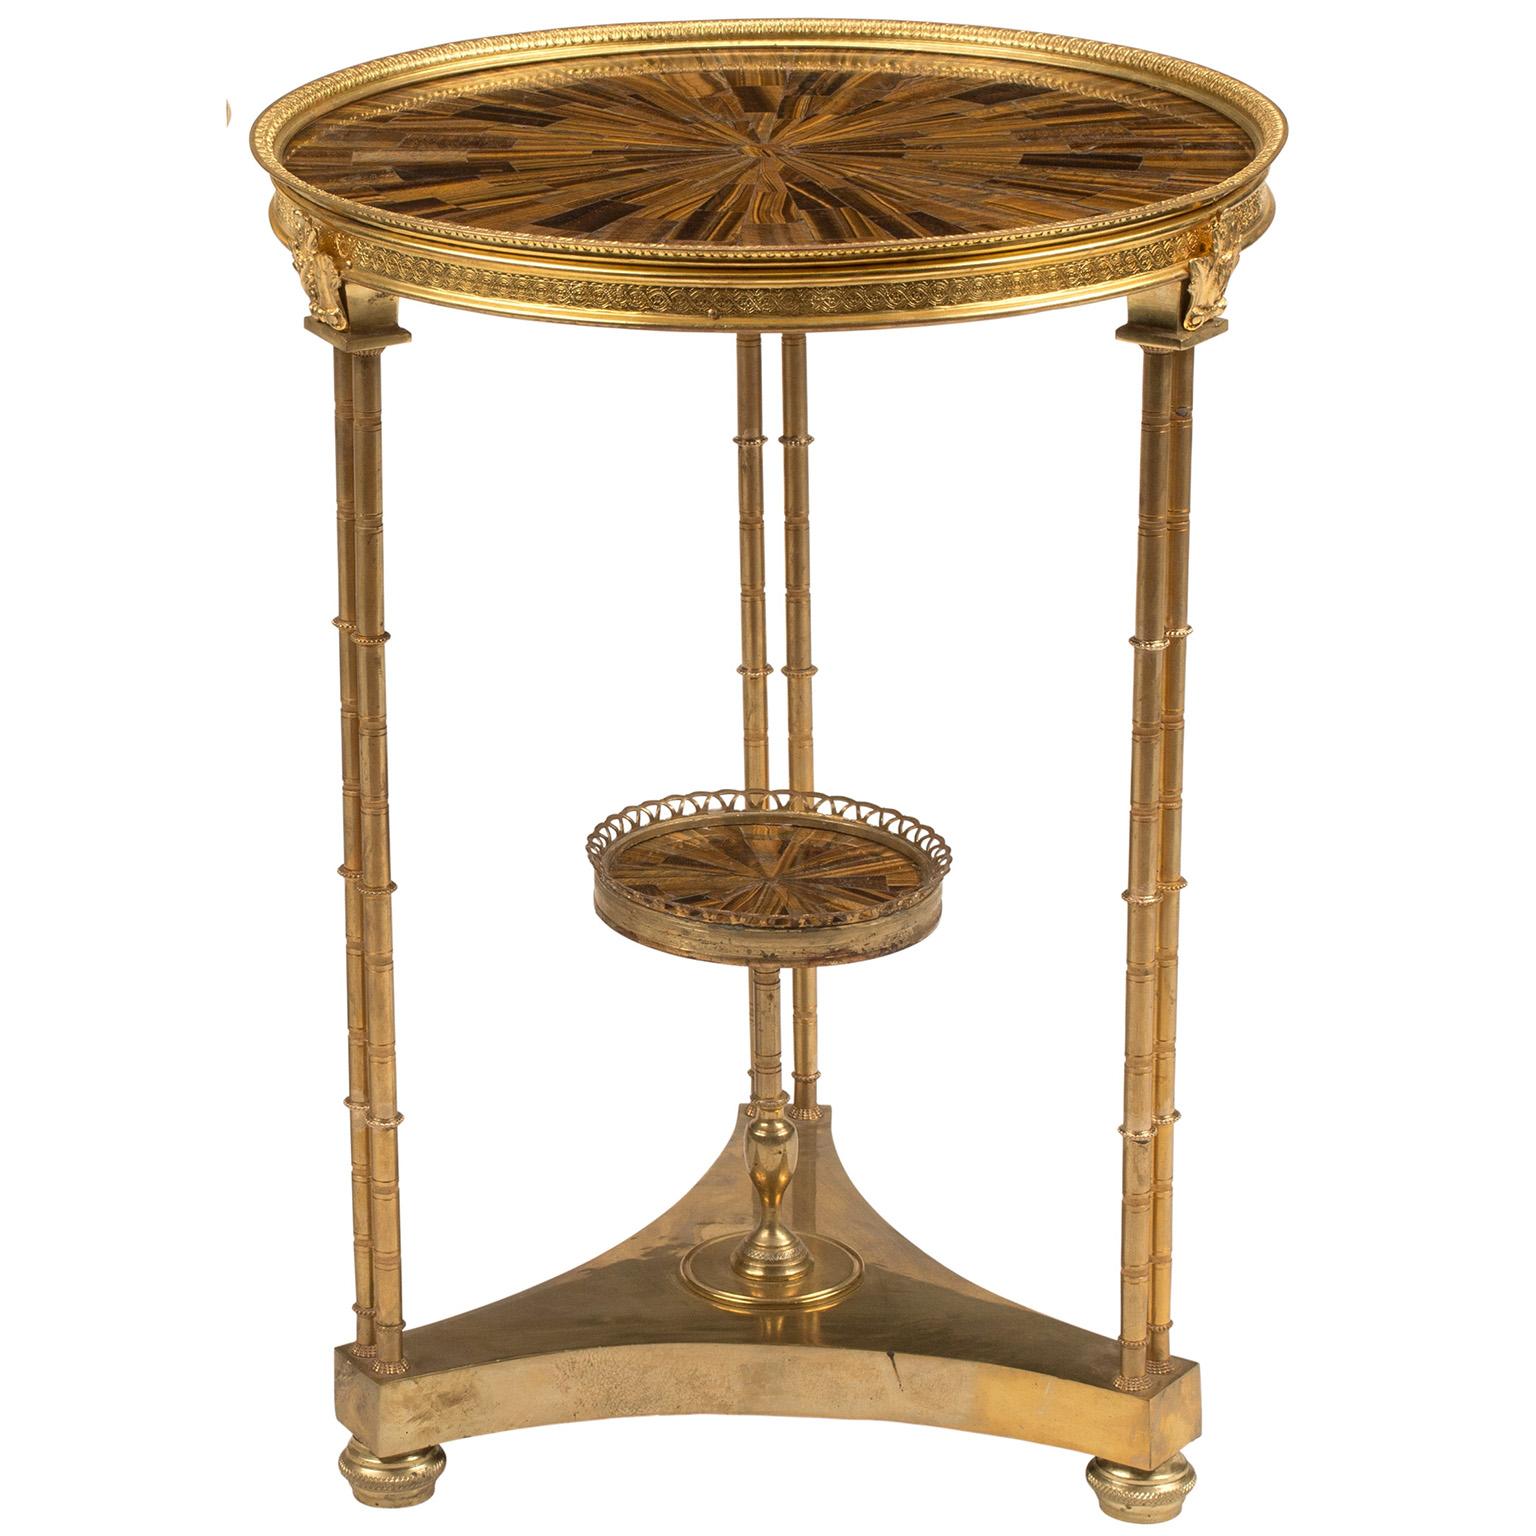 Pair of neoclassical revival style gilt bronze and gilt metal two-tier guéridons round end or side tables with tiger-eye inlaid tops. The triform gilt-bronze bases, topped with a circular cast-chased gilt-bronze rim and fitted with a symmetrically